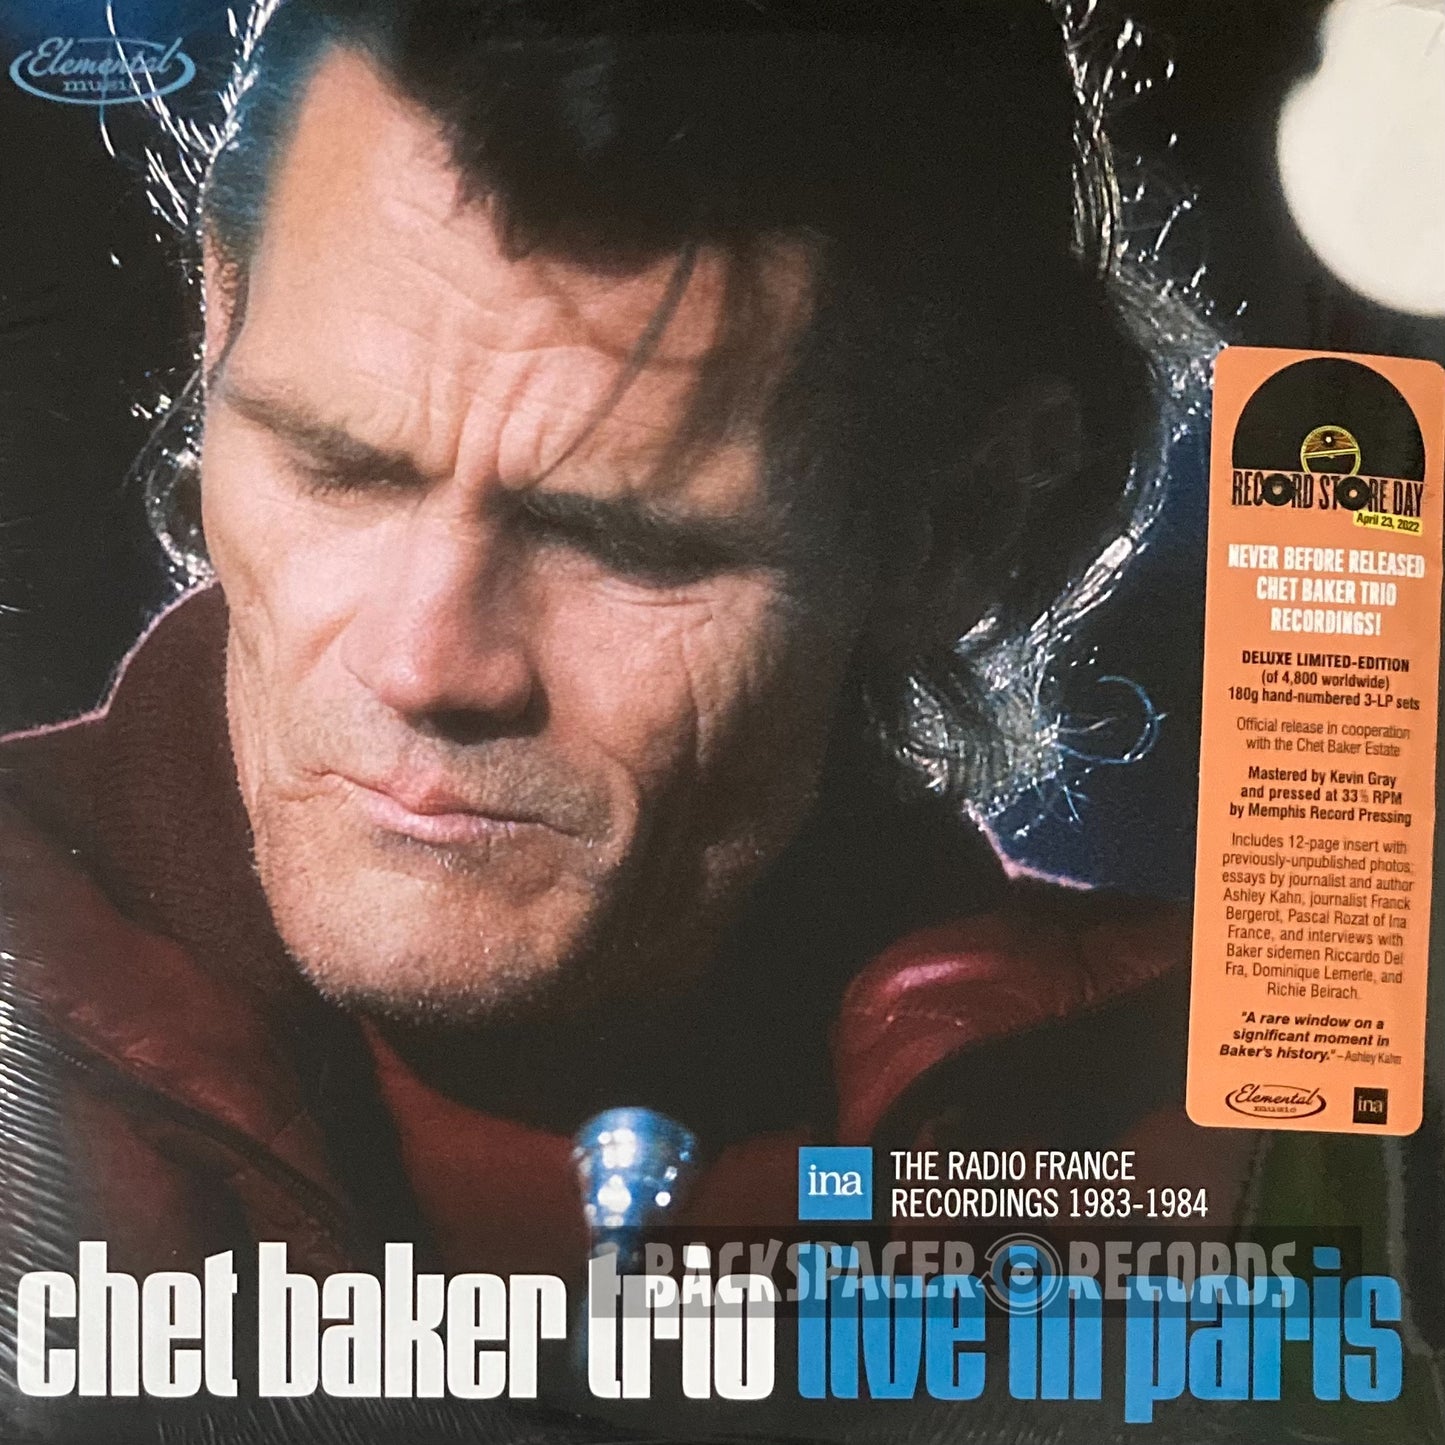 Chet Baker Trio – Live In Paris: The Radio France Recordings 1983-1984 (Limited Edition) 3-LP (Sealed)